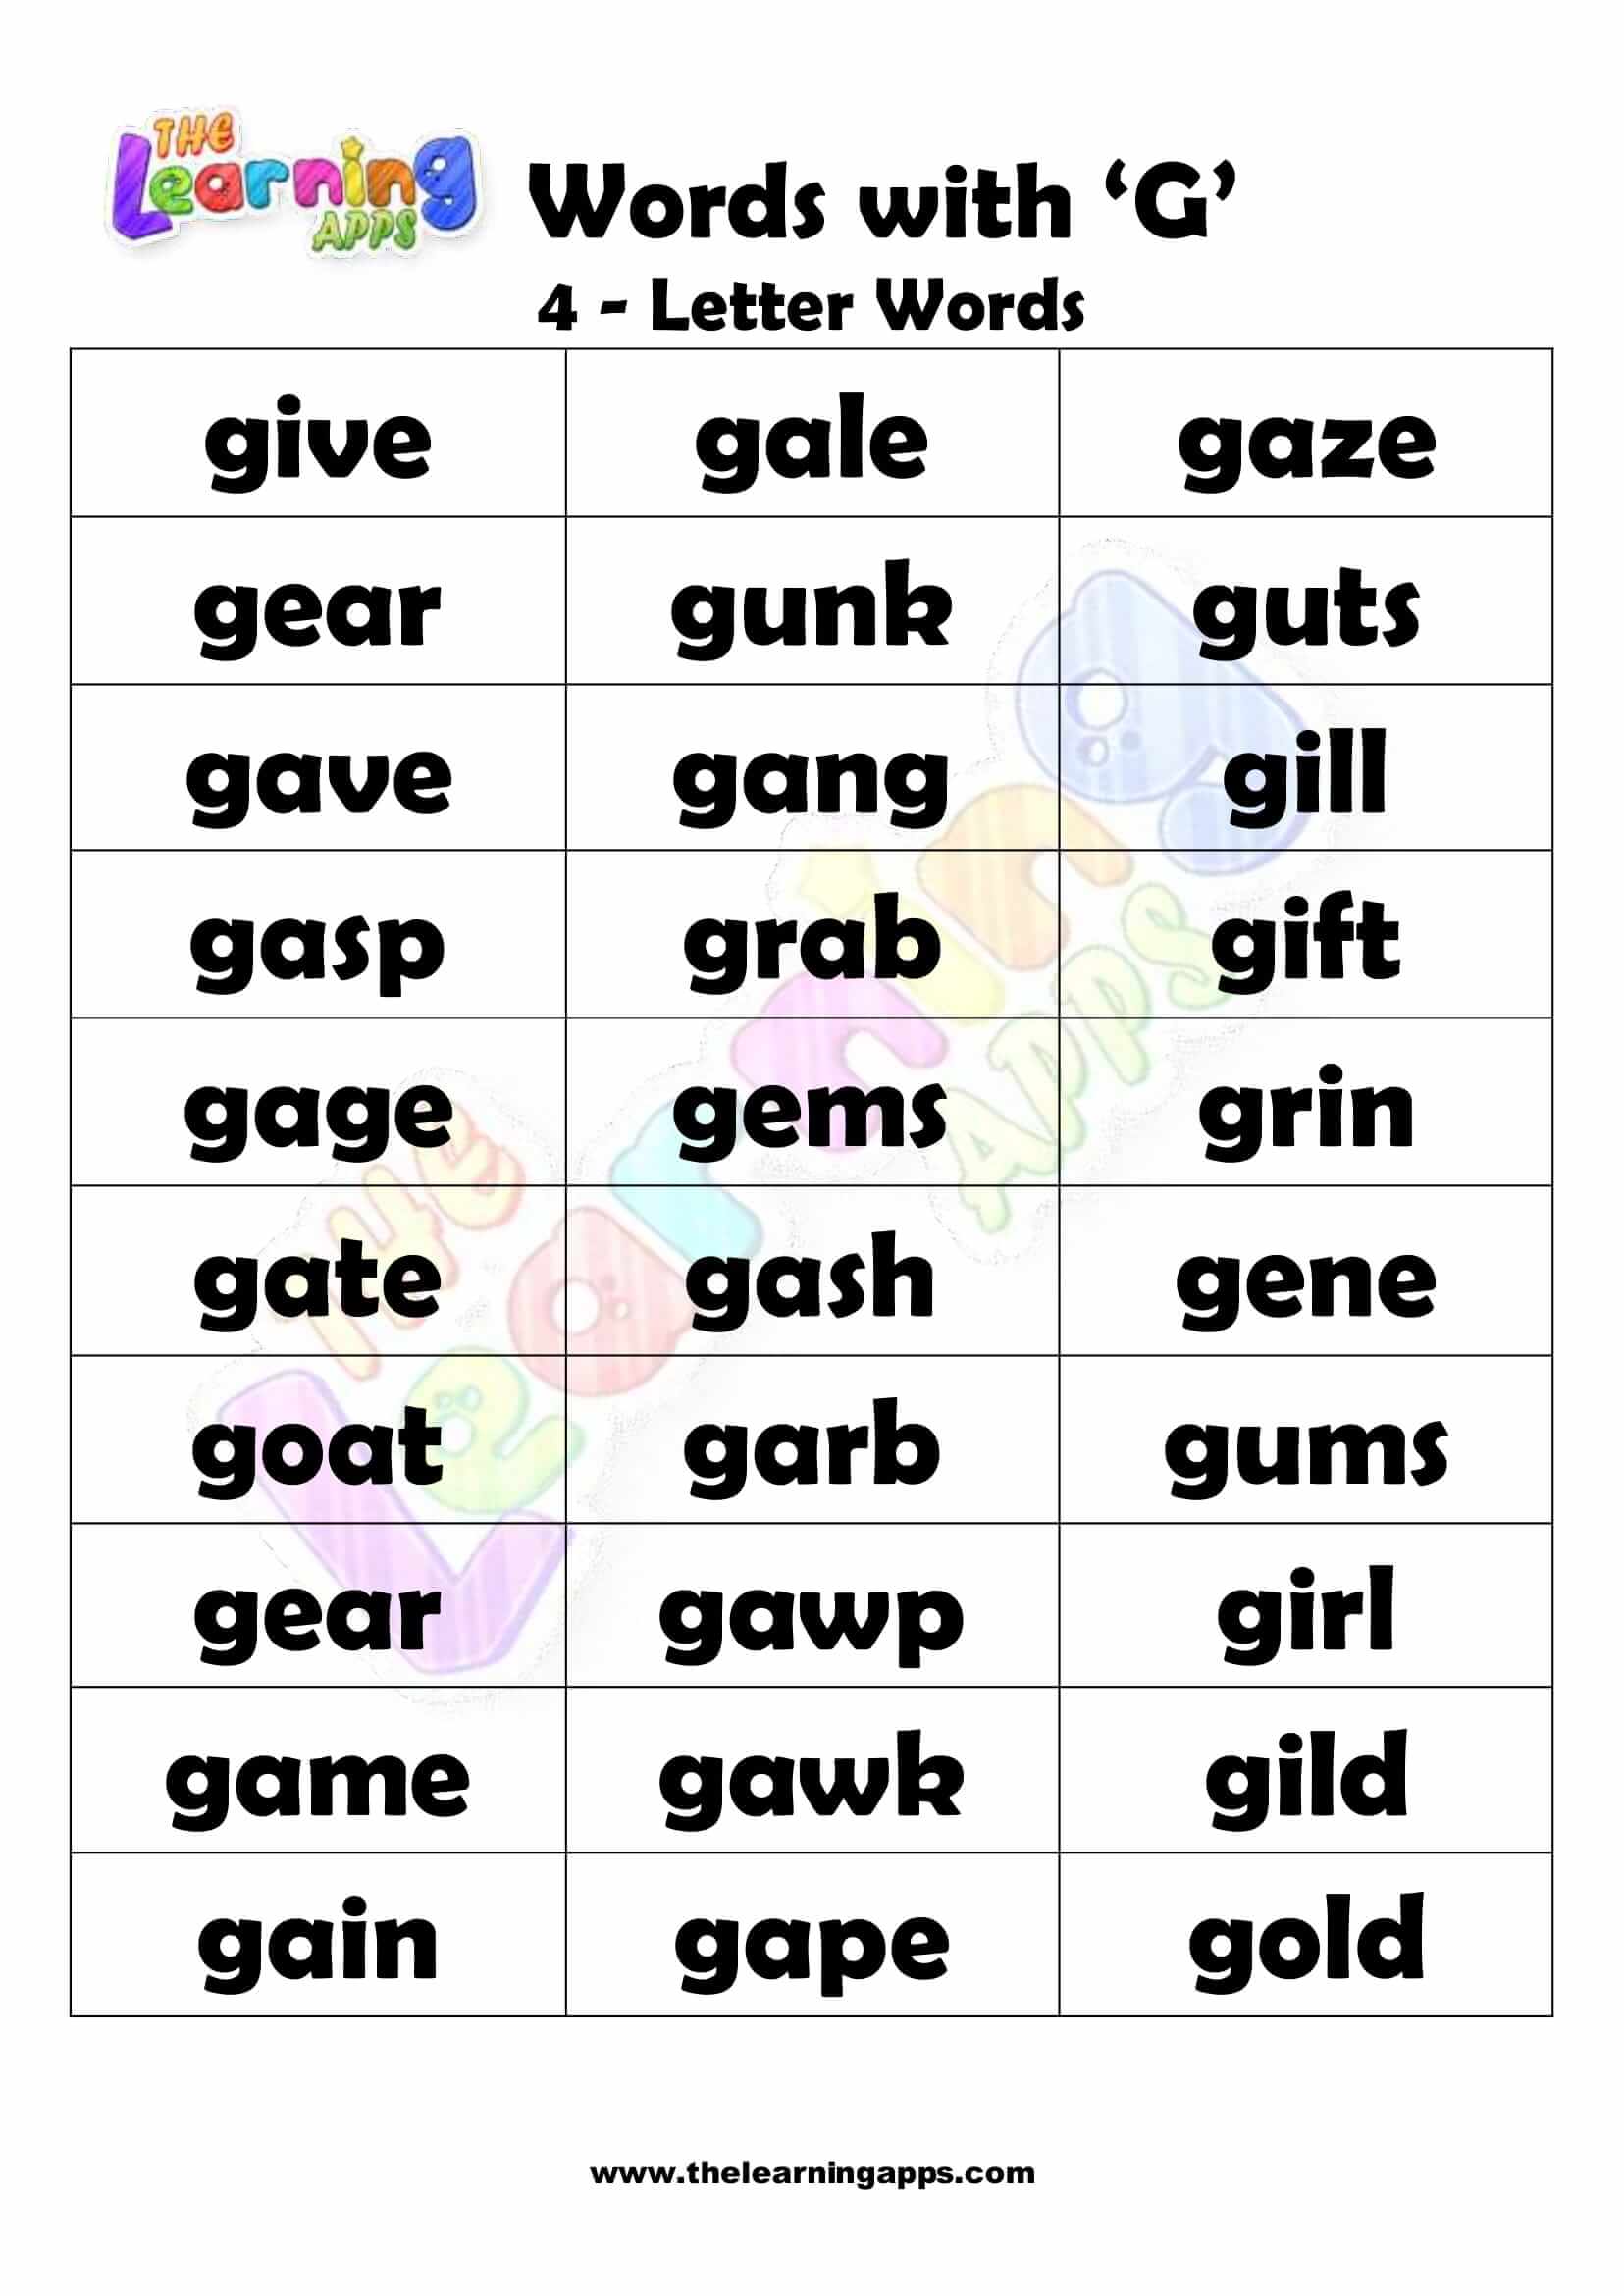 4 LETTER WORD STARTING WITH G